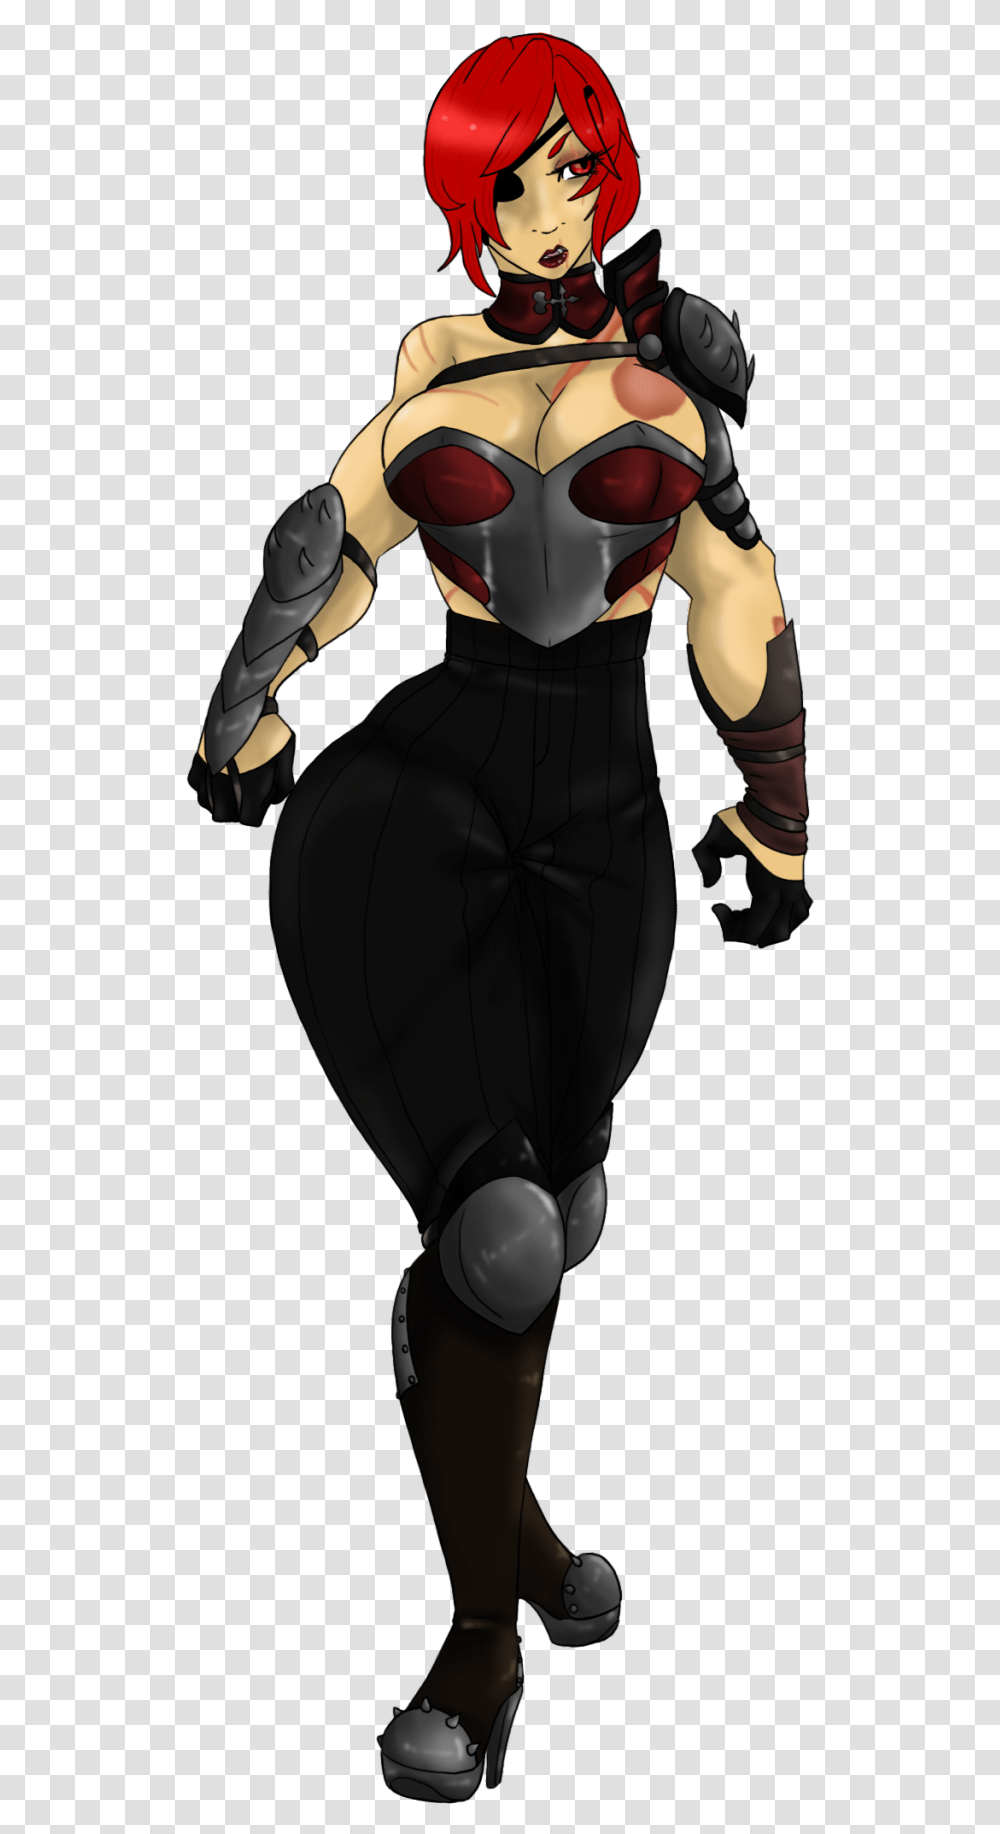 Ive Gone Through Quite A Bit Since My Last Post Here, Helmet, Apparel, Manga Transparent Png